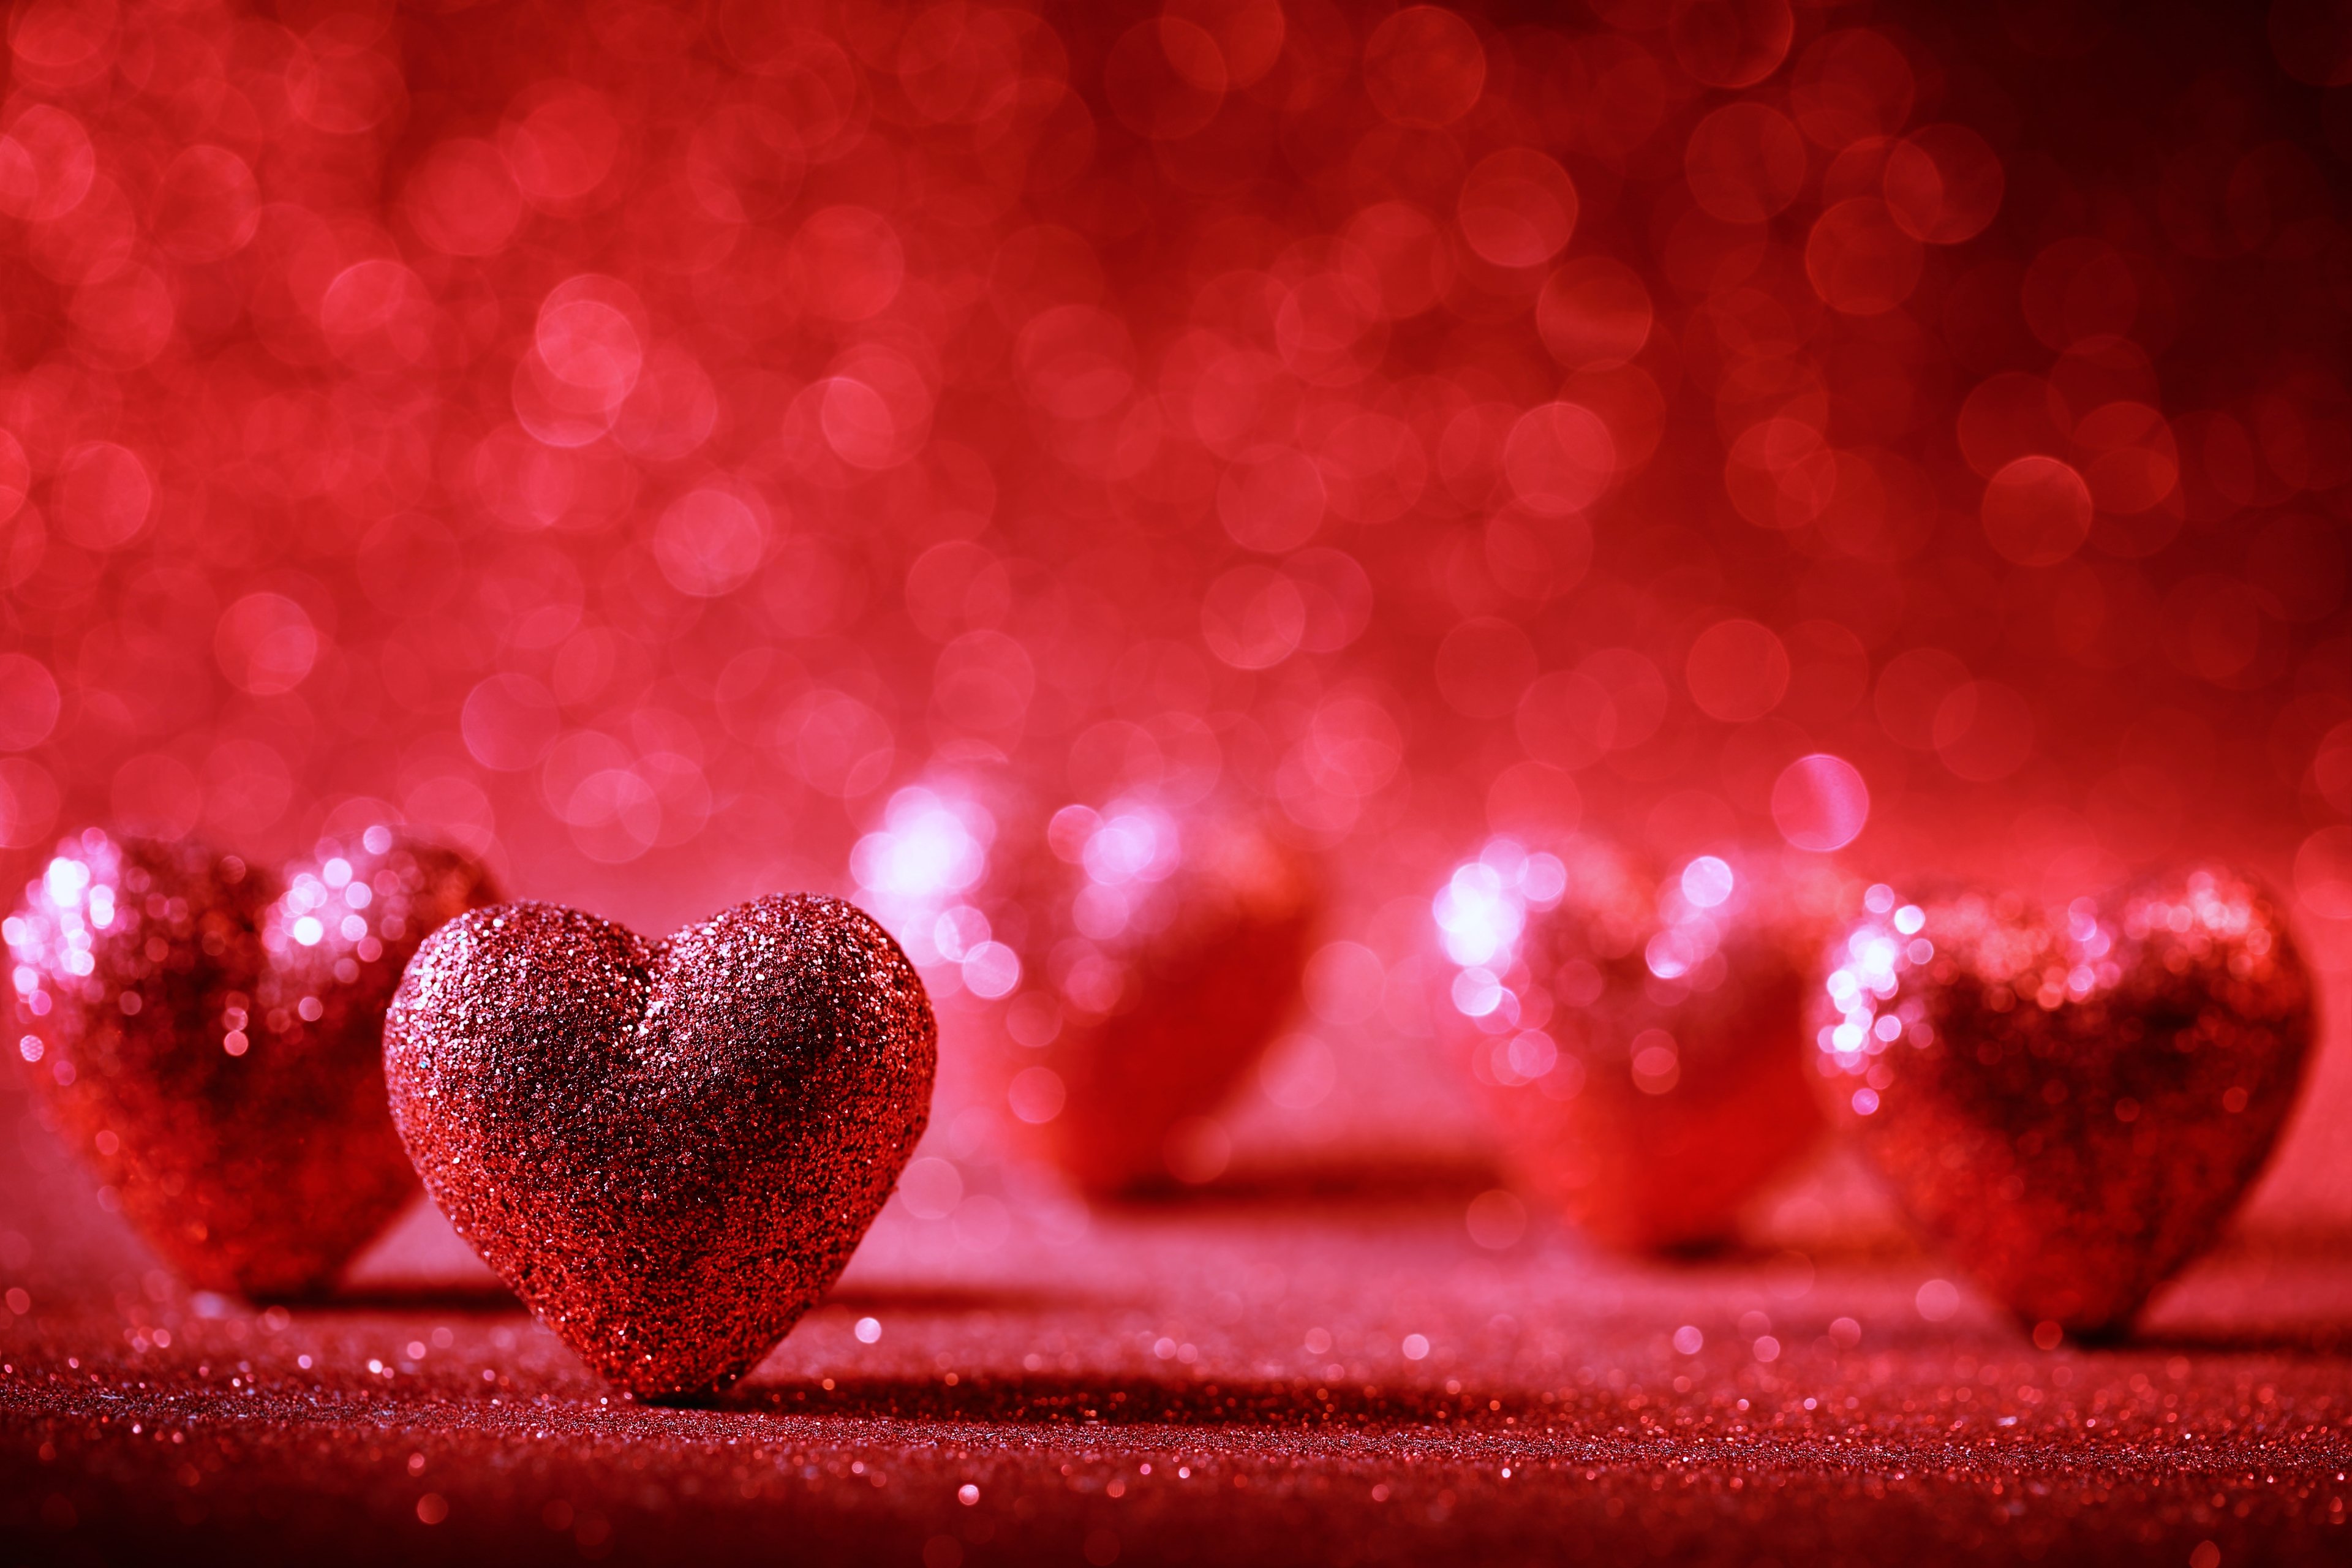 hearts, Red, Love, Romance, Emotions, Backgroung, Wallpapers, Beauty, Decoration Wallpaper